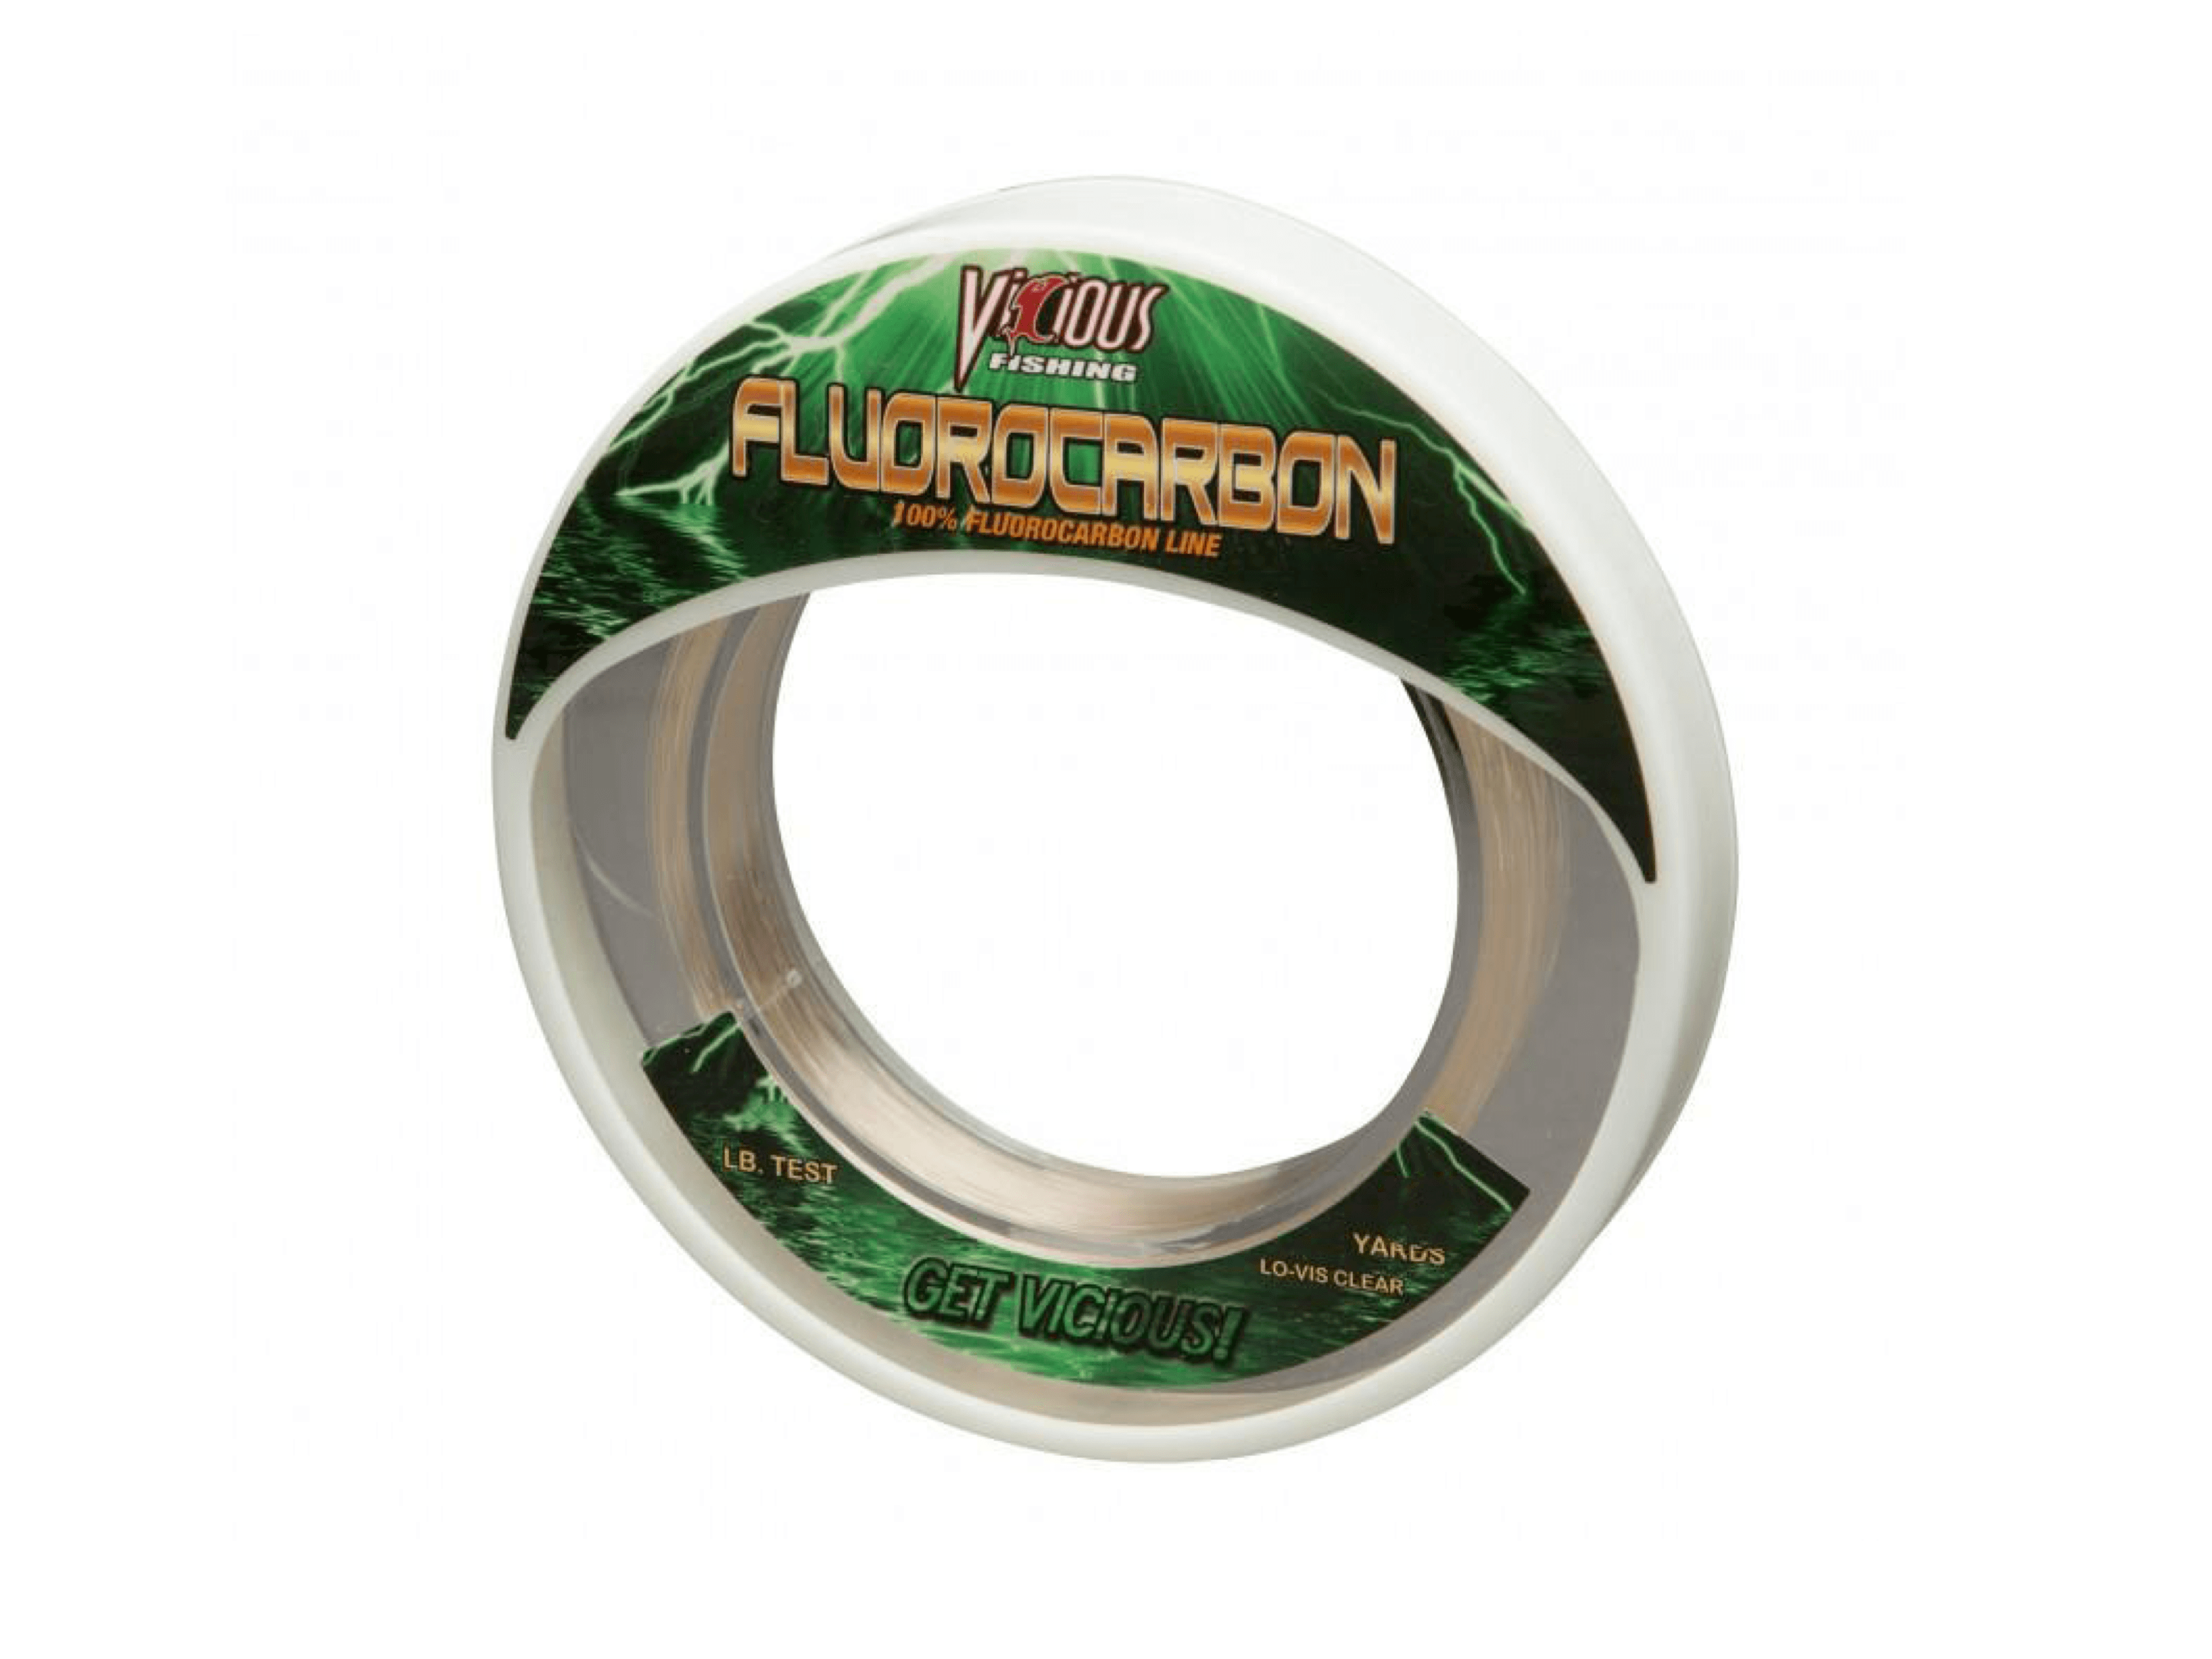 100 lb Fluorocarbon Leader Line: Vicious Fishing– Hunting and